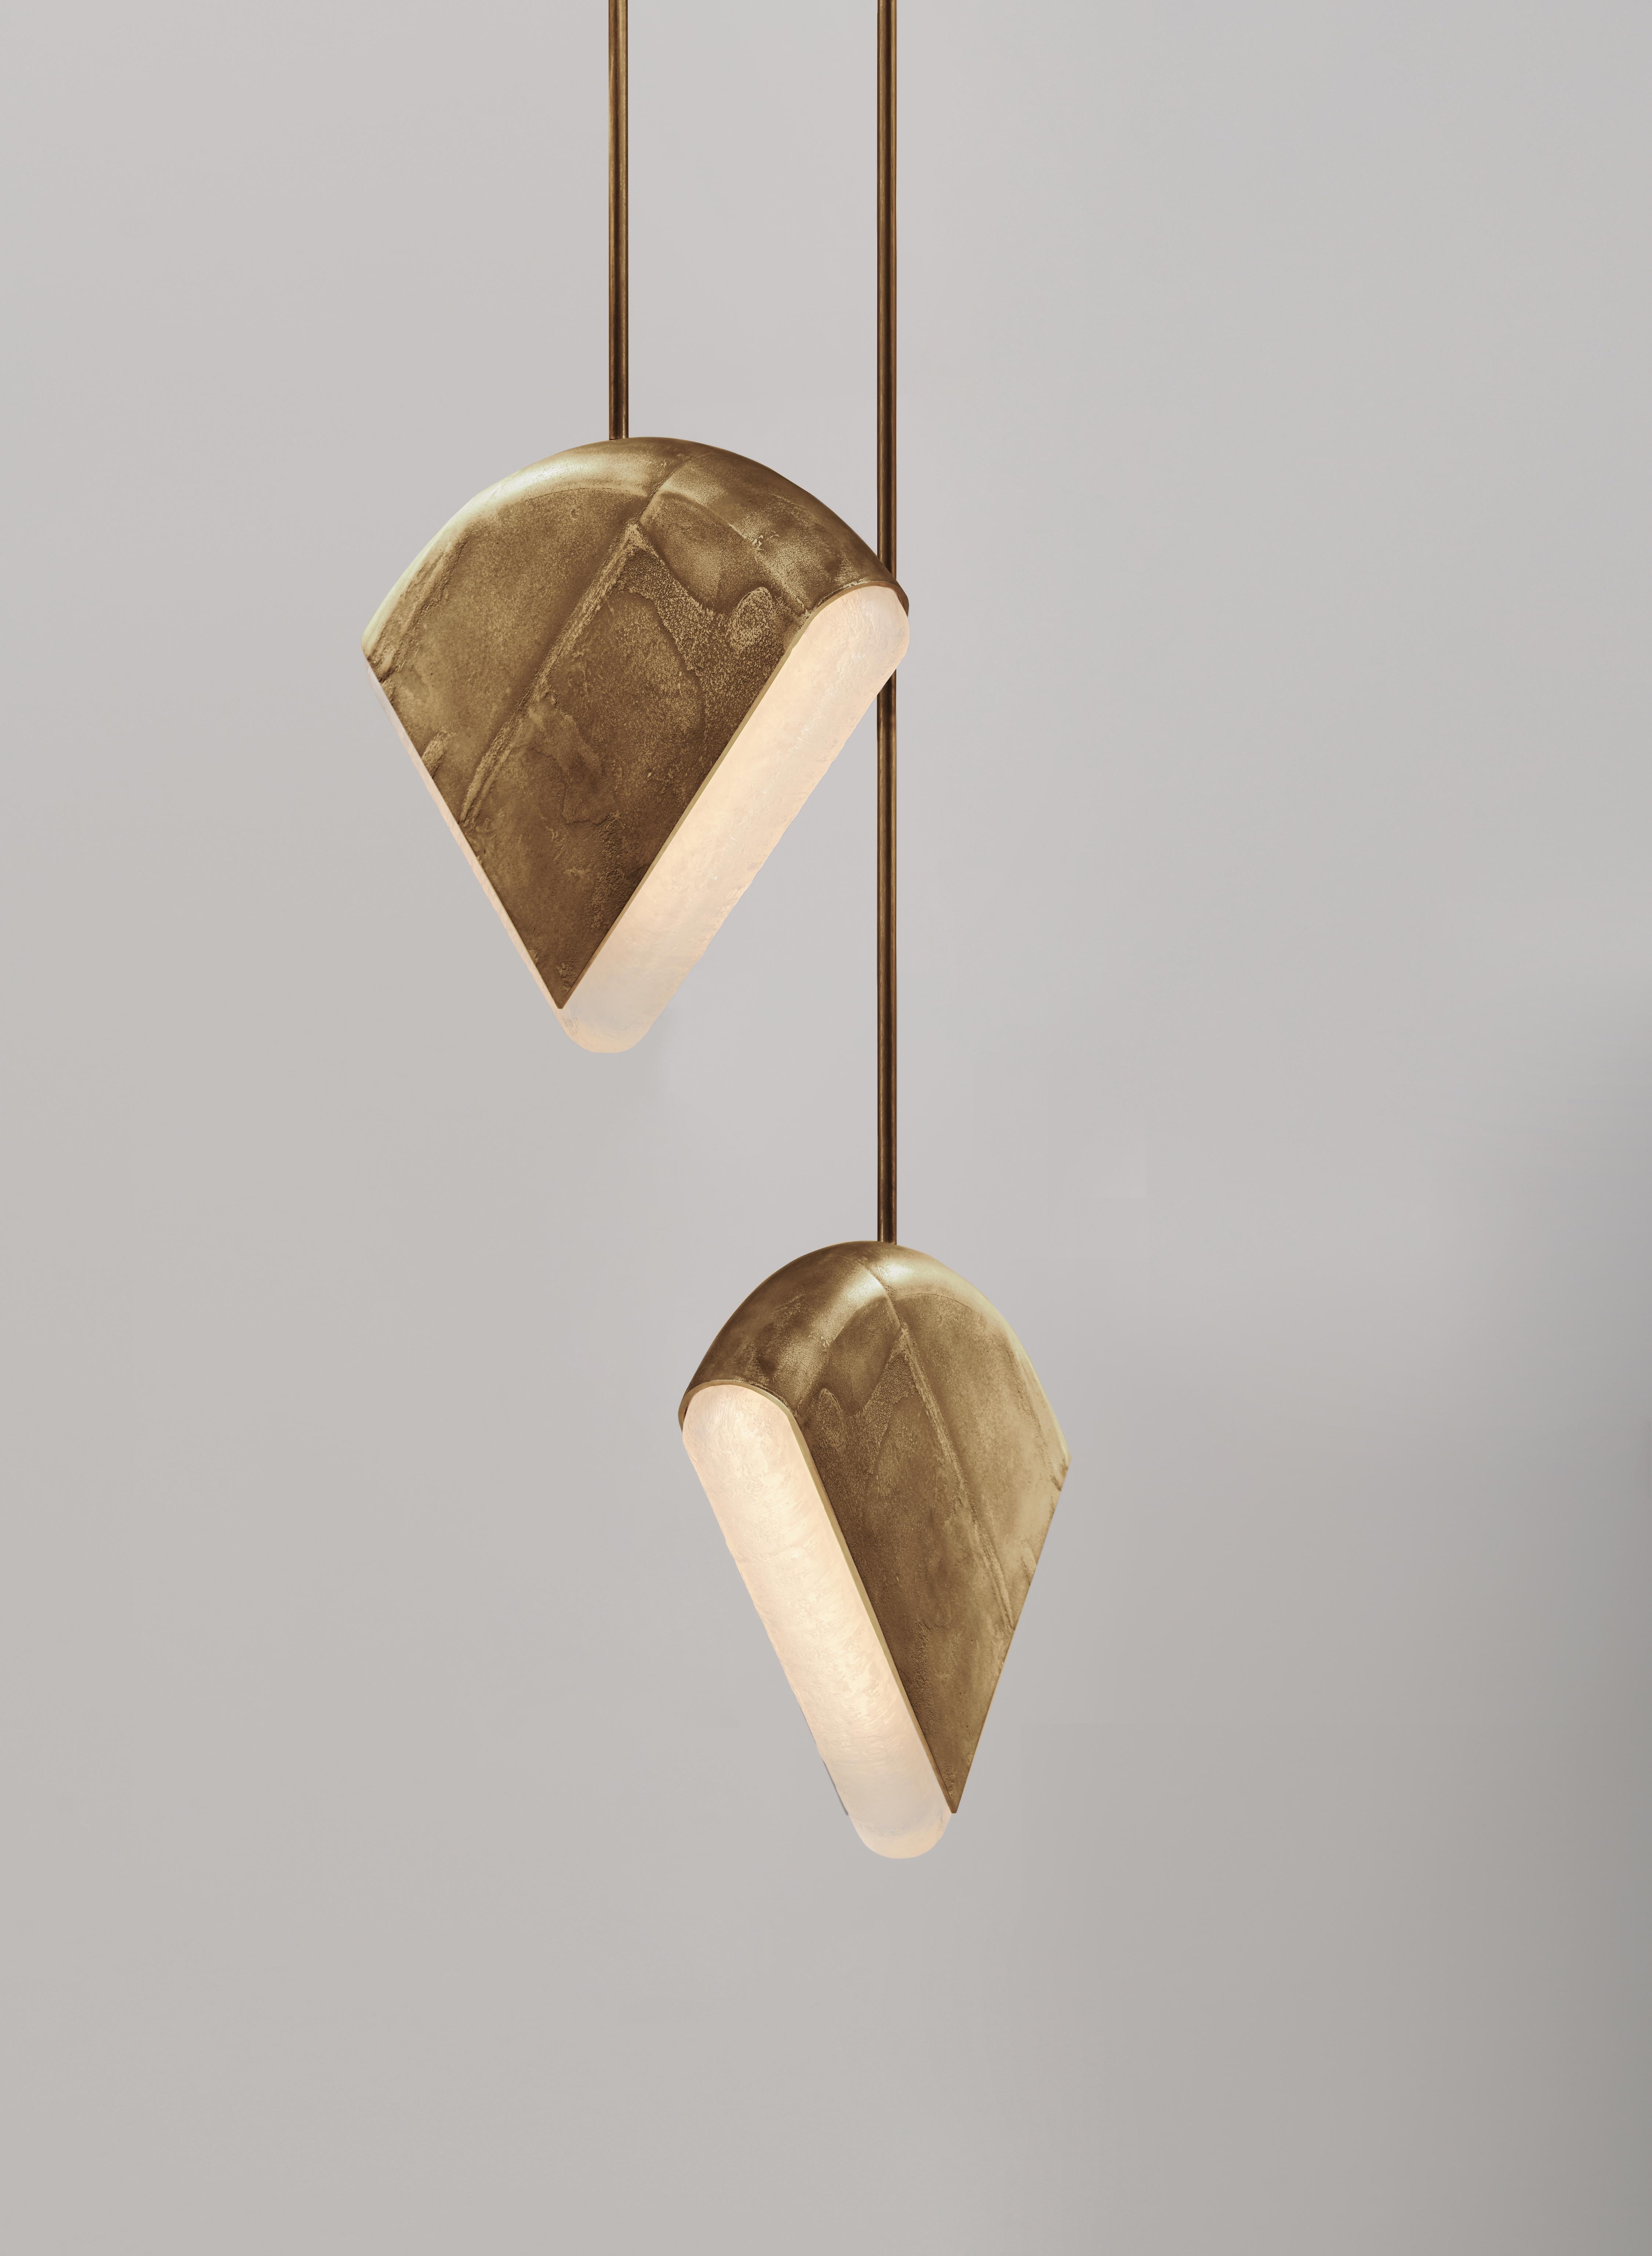 The “bb” pendant is part of Corpus Studio’s sculptural bb collection. The collection seeks to explore the limits between minimal and maximal, brutalism and elegance, sensual and humorous.

The sculptural design comes from the convergence of tectonic